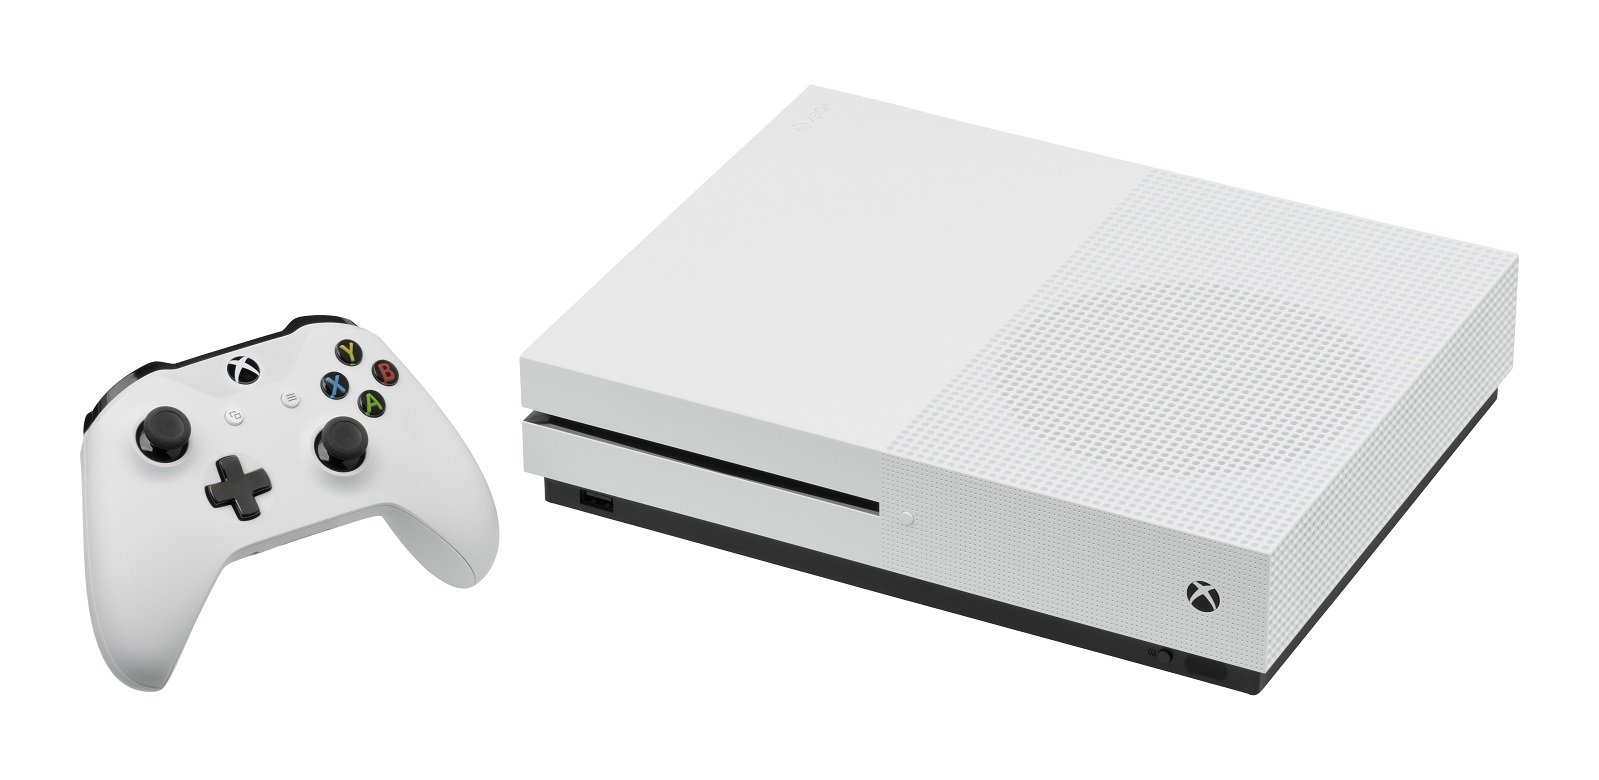 Rumors Are Circulating About A Disc-Less Xbox One S Coming In The Spring